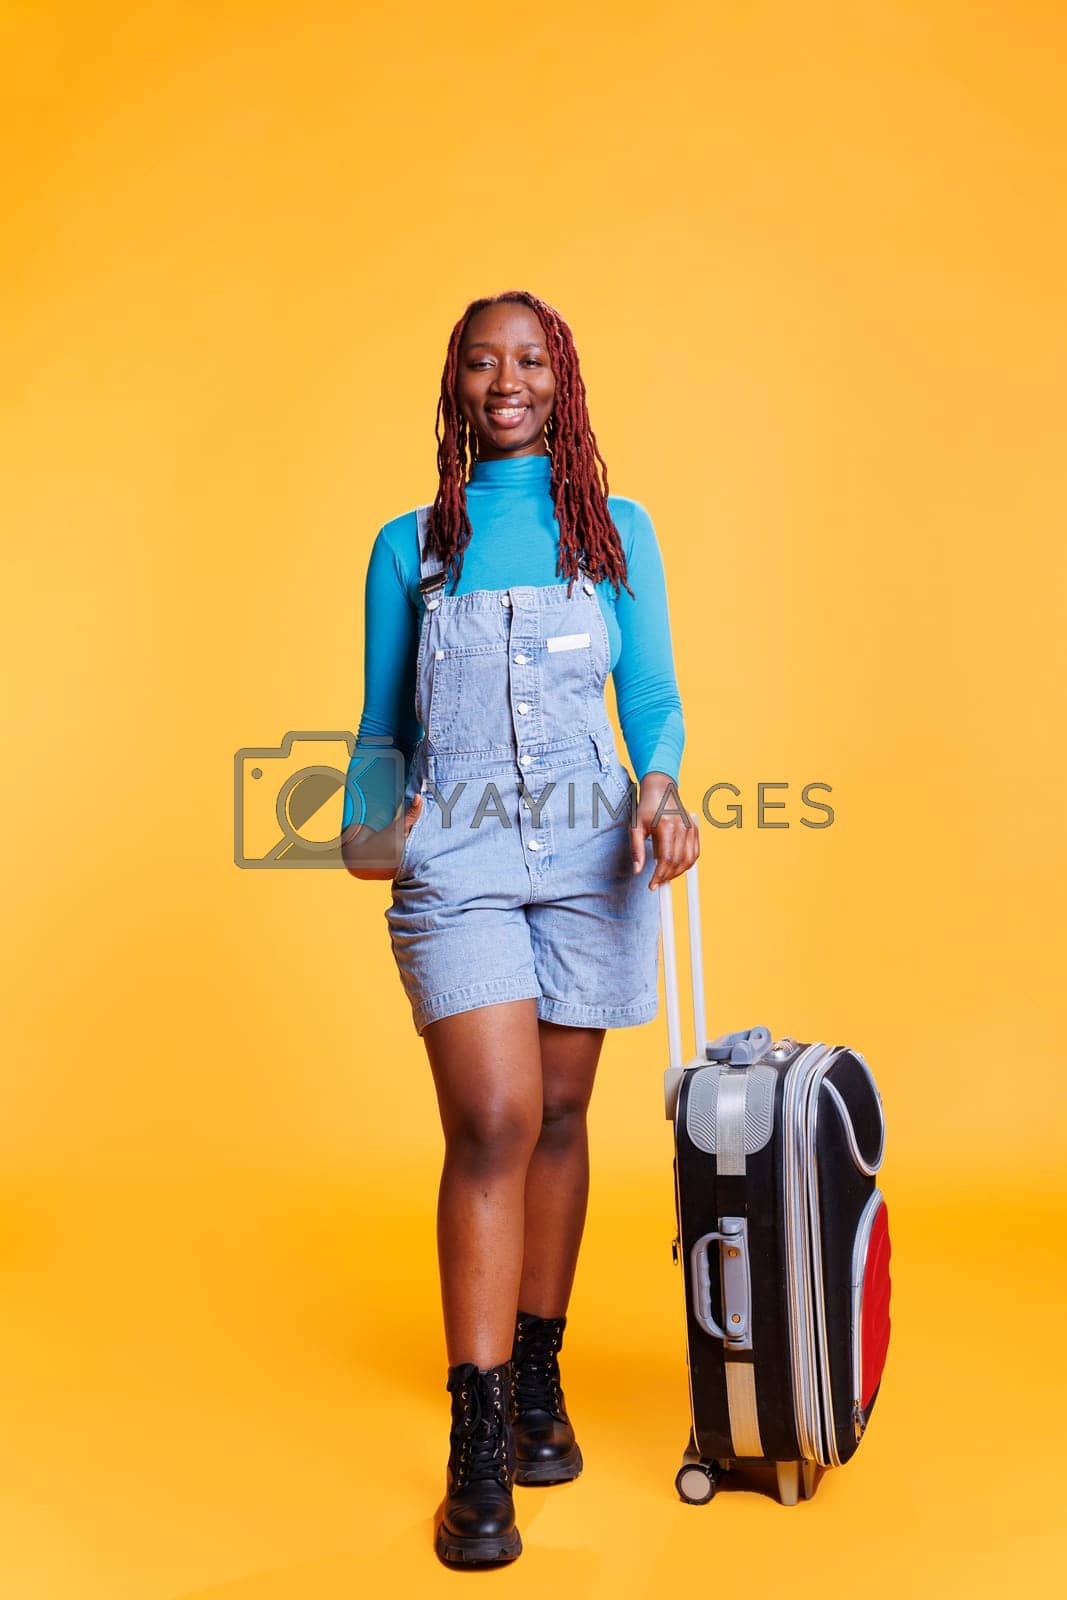 Royalty free image of Young traveller posing with trolley by DCStudio